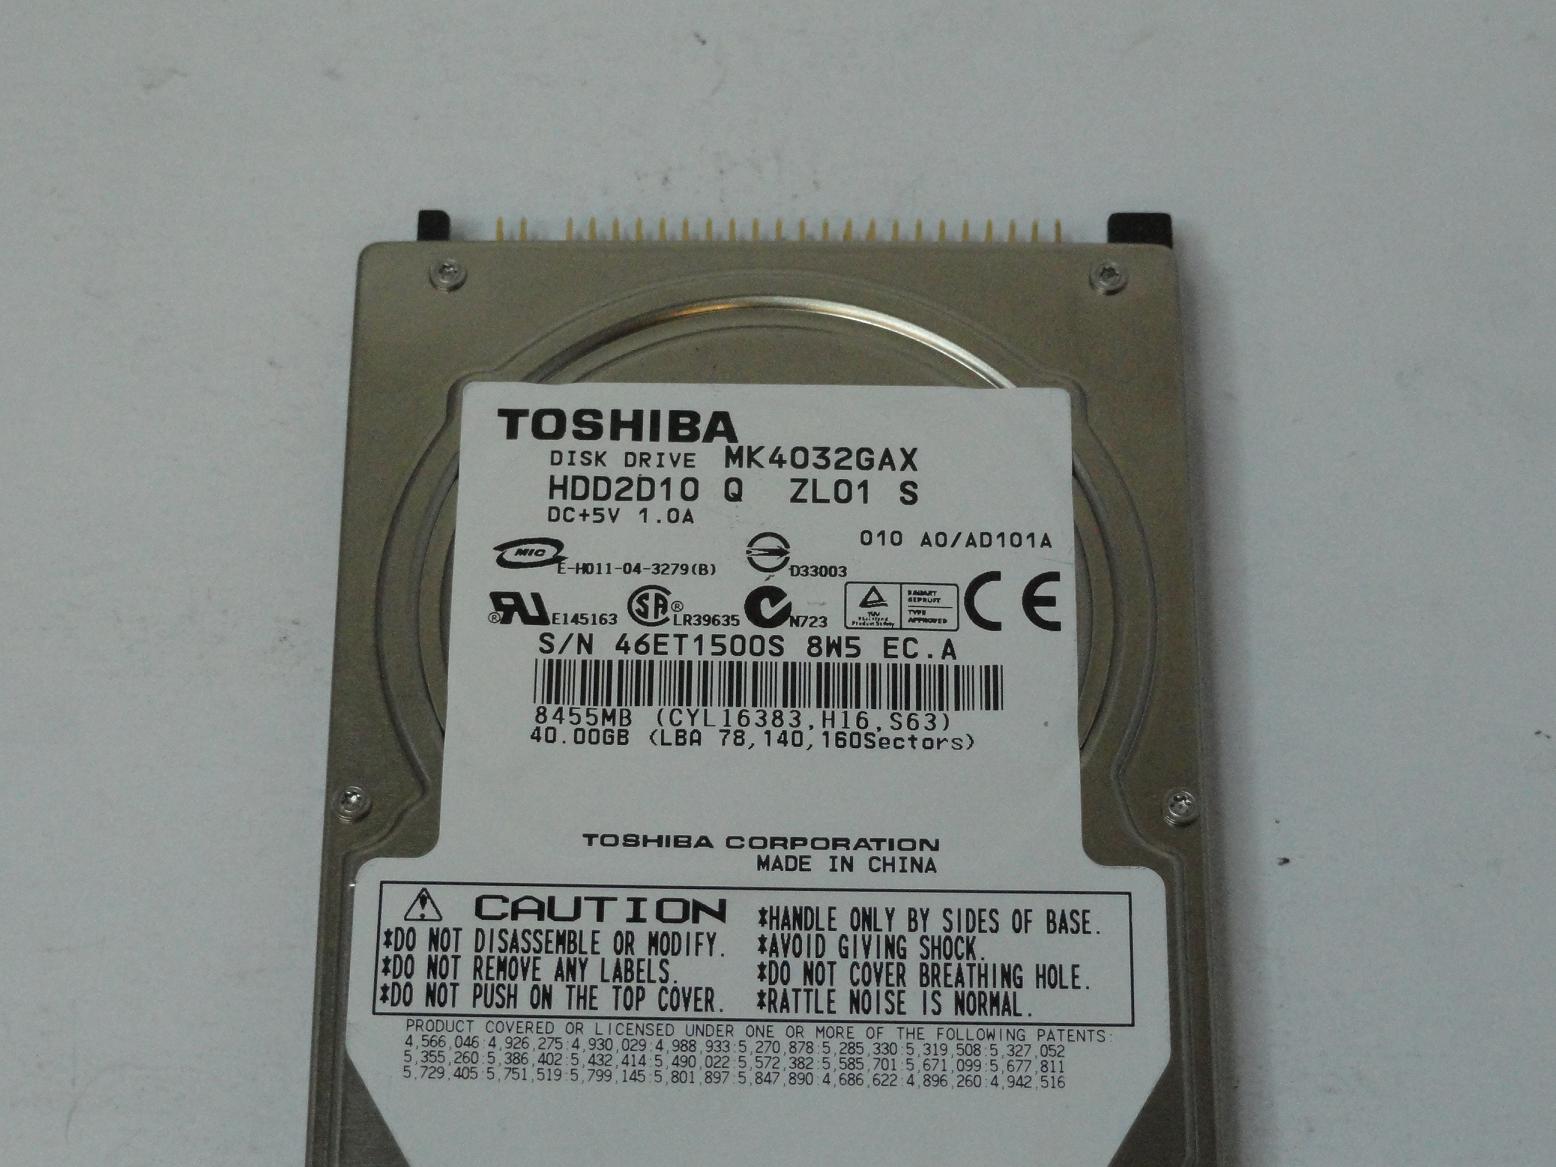 PR14890_HDD2D10_Toshiba 33.82GB IDE 5400rpm 2.5in HDD - Image3